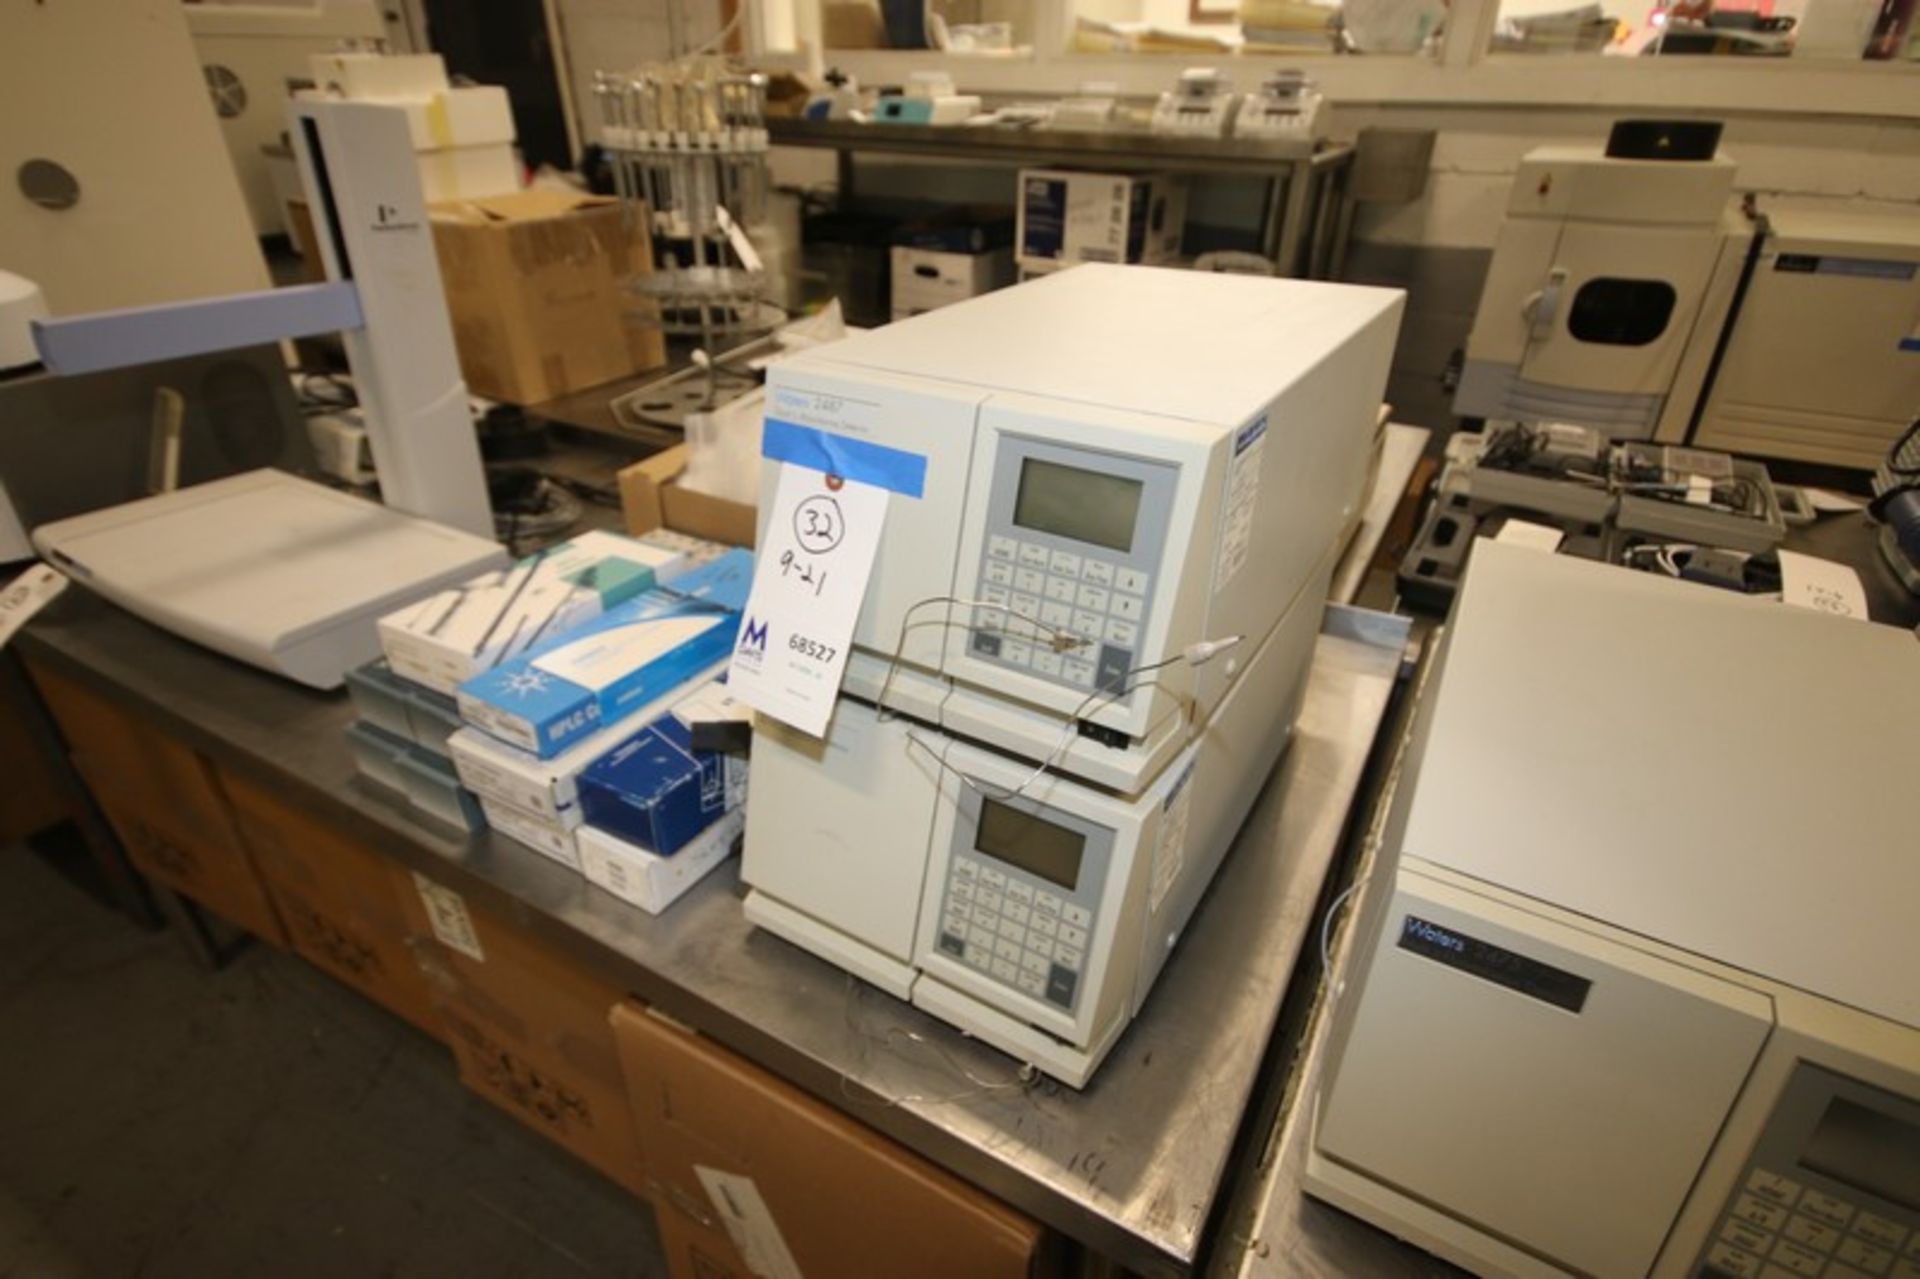 Alliance Waters 2487 Dual Absorbance Detector, S/N E07487 298M, with (4) Boxes of Waters HPLC